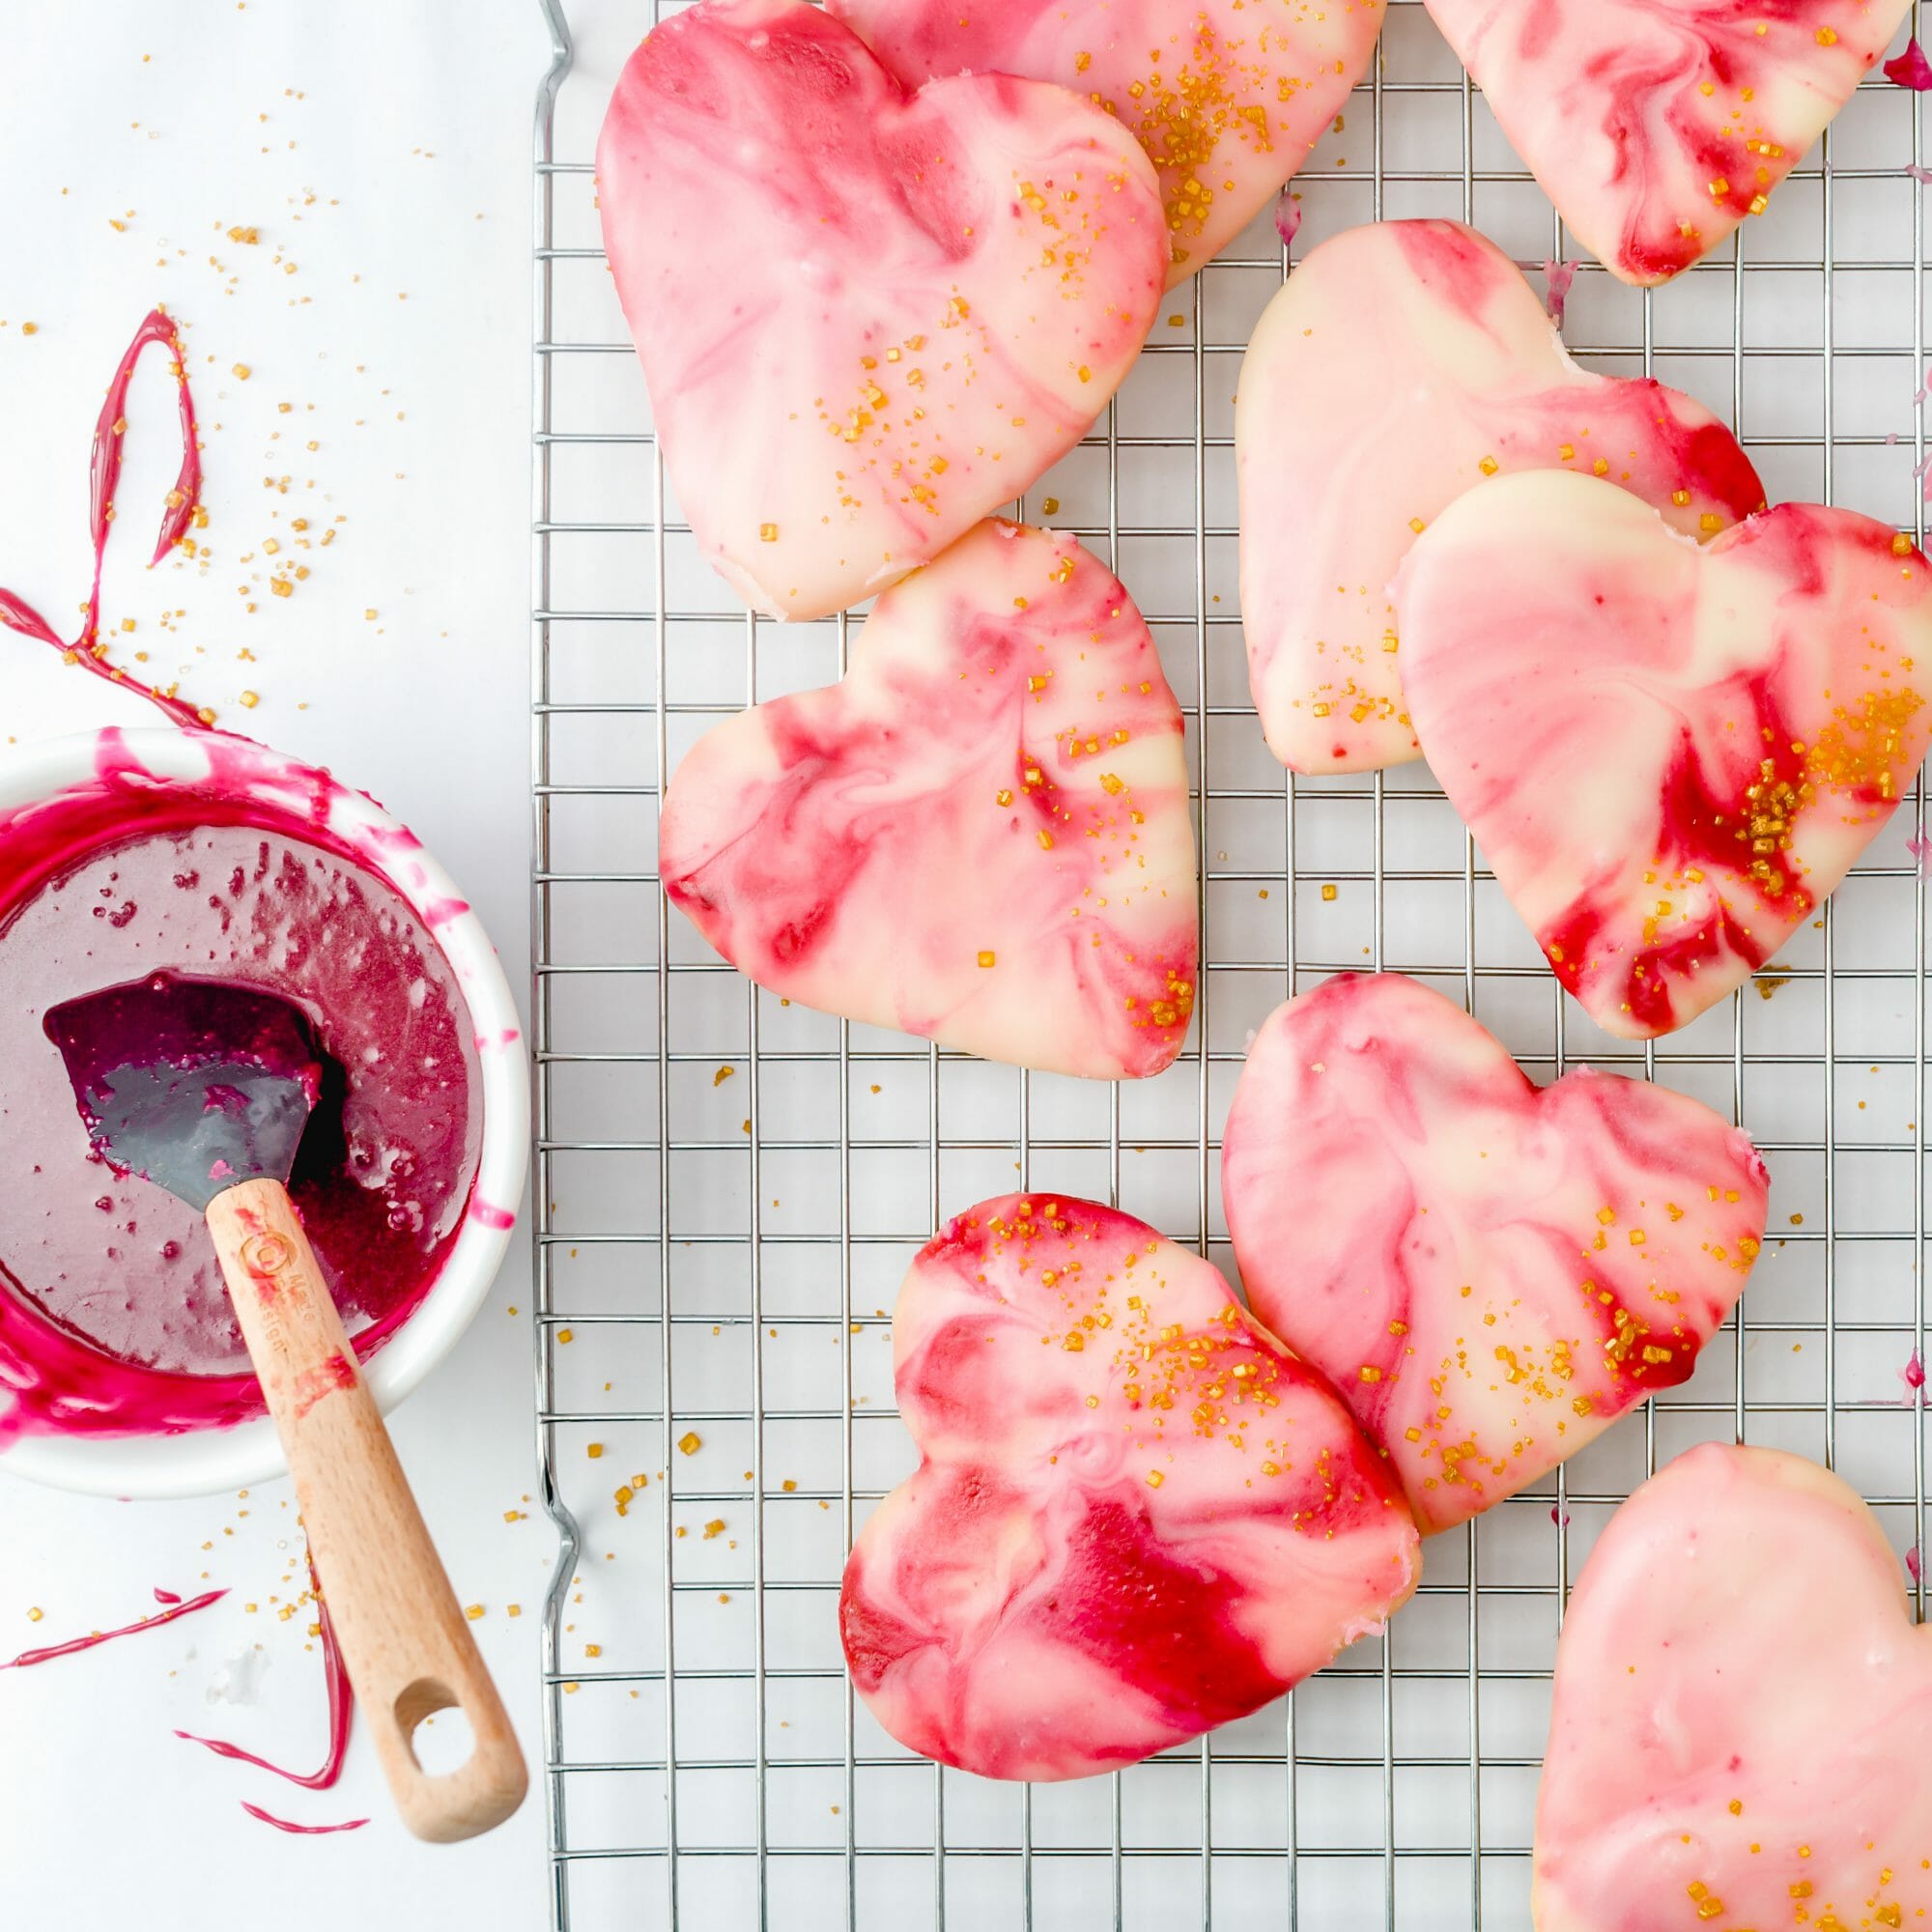 Dipped Buttercream Marbled Heart Cookies | The Fastest Way to Decorate Cookies || JennyCookies.com #cookies #cookierecipe #cookiedecorating #heartcookies #valentinesday #jennycookies